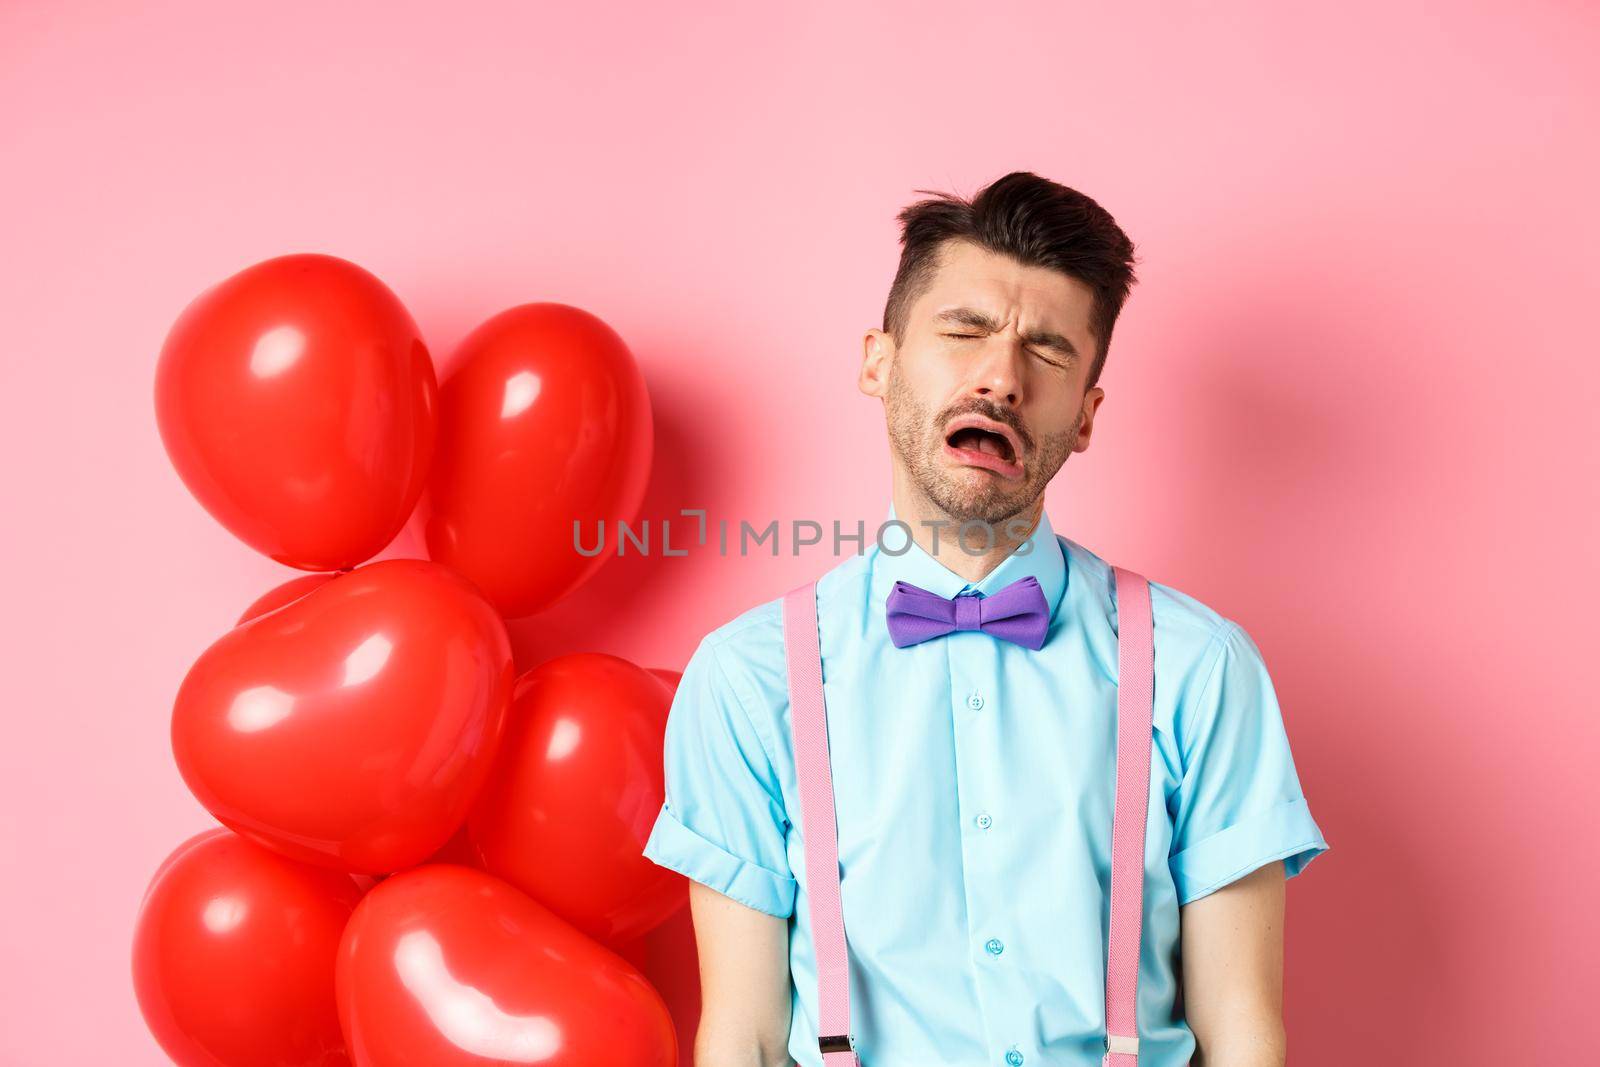 Valentines concept. Sad and heartbroken man crying over break-up, being cheated on lovers day, sobbing and feeling lonely, standing on pink background.